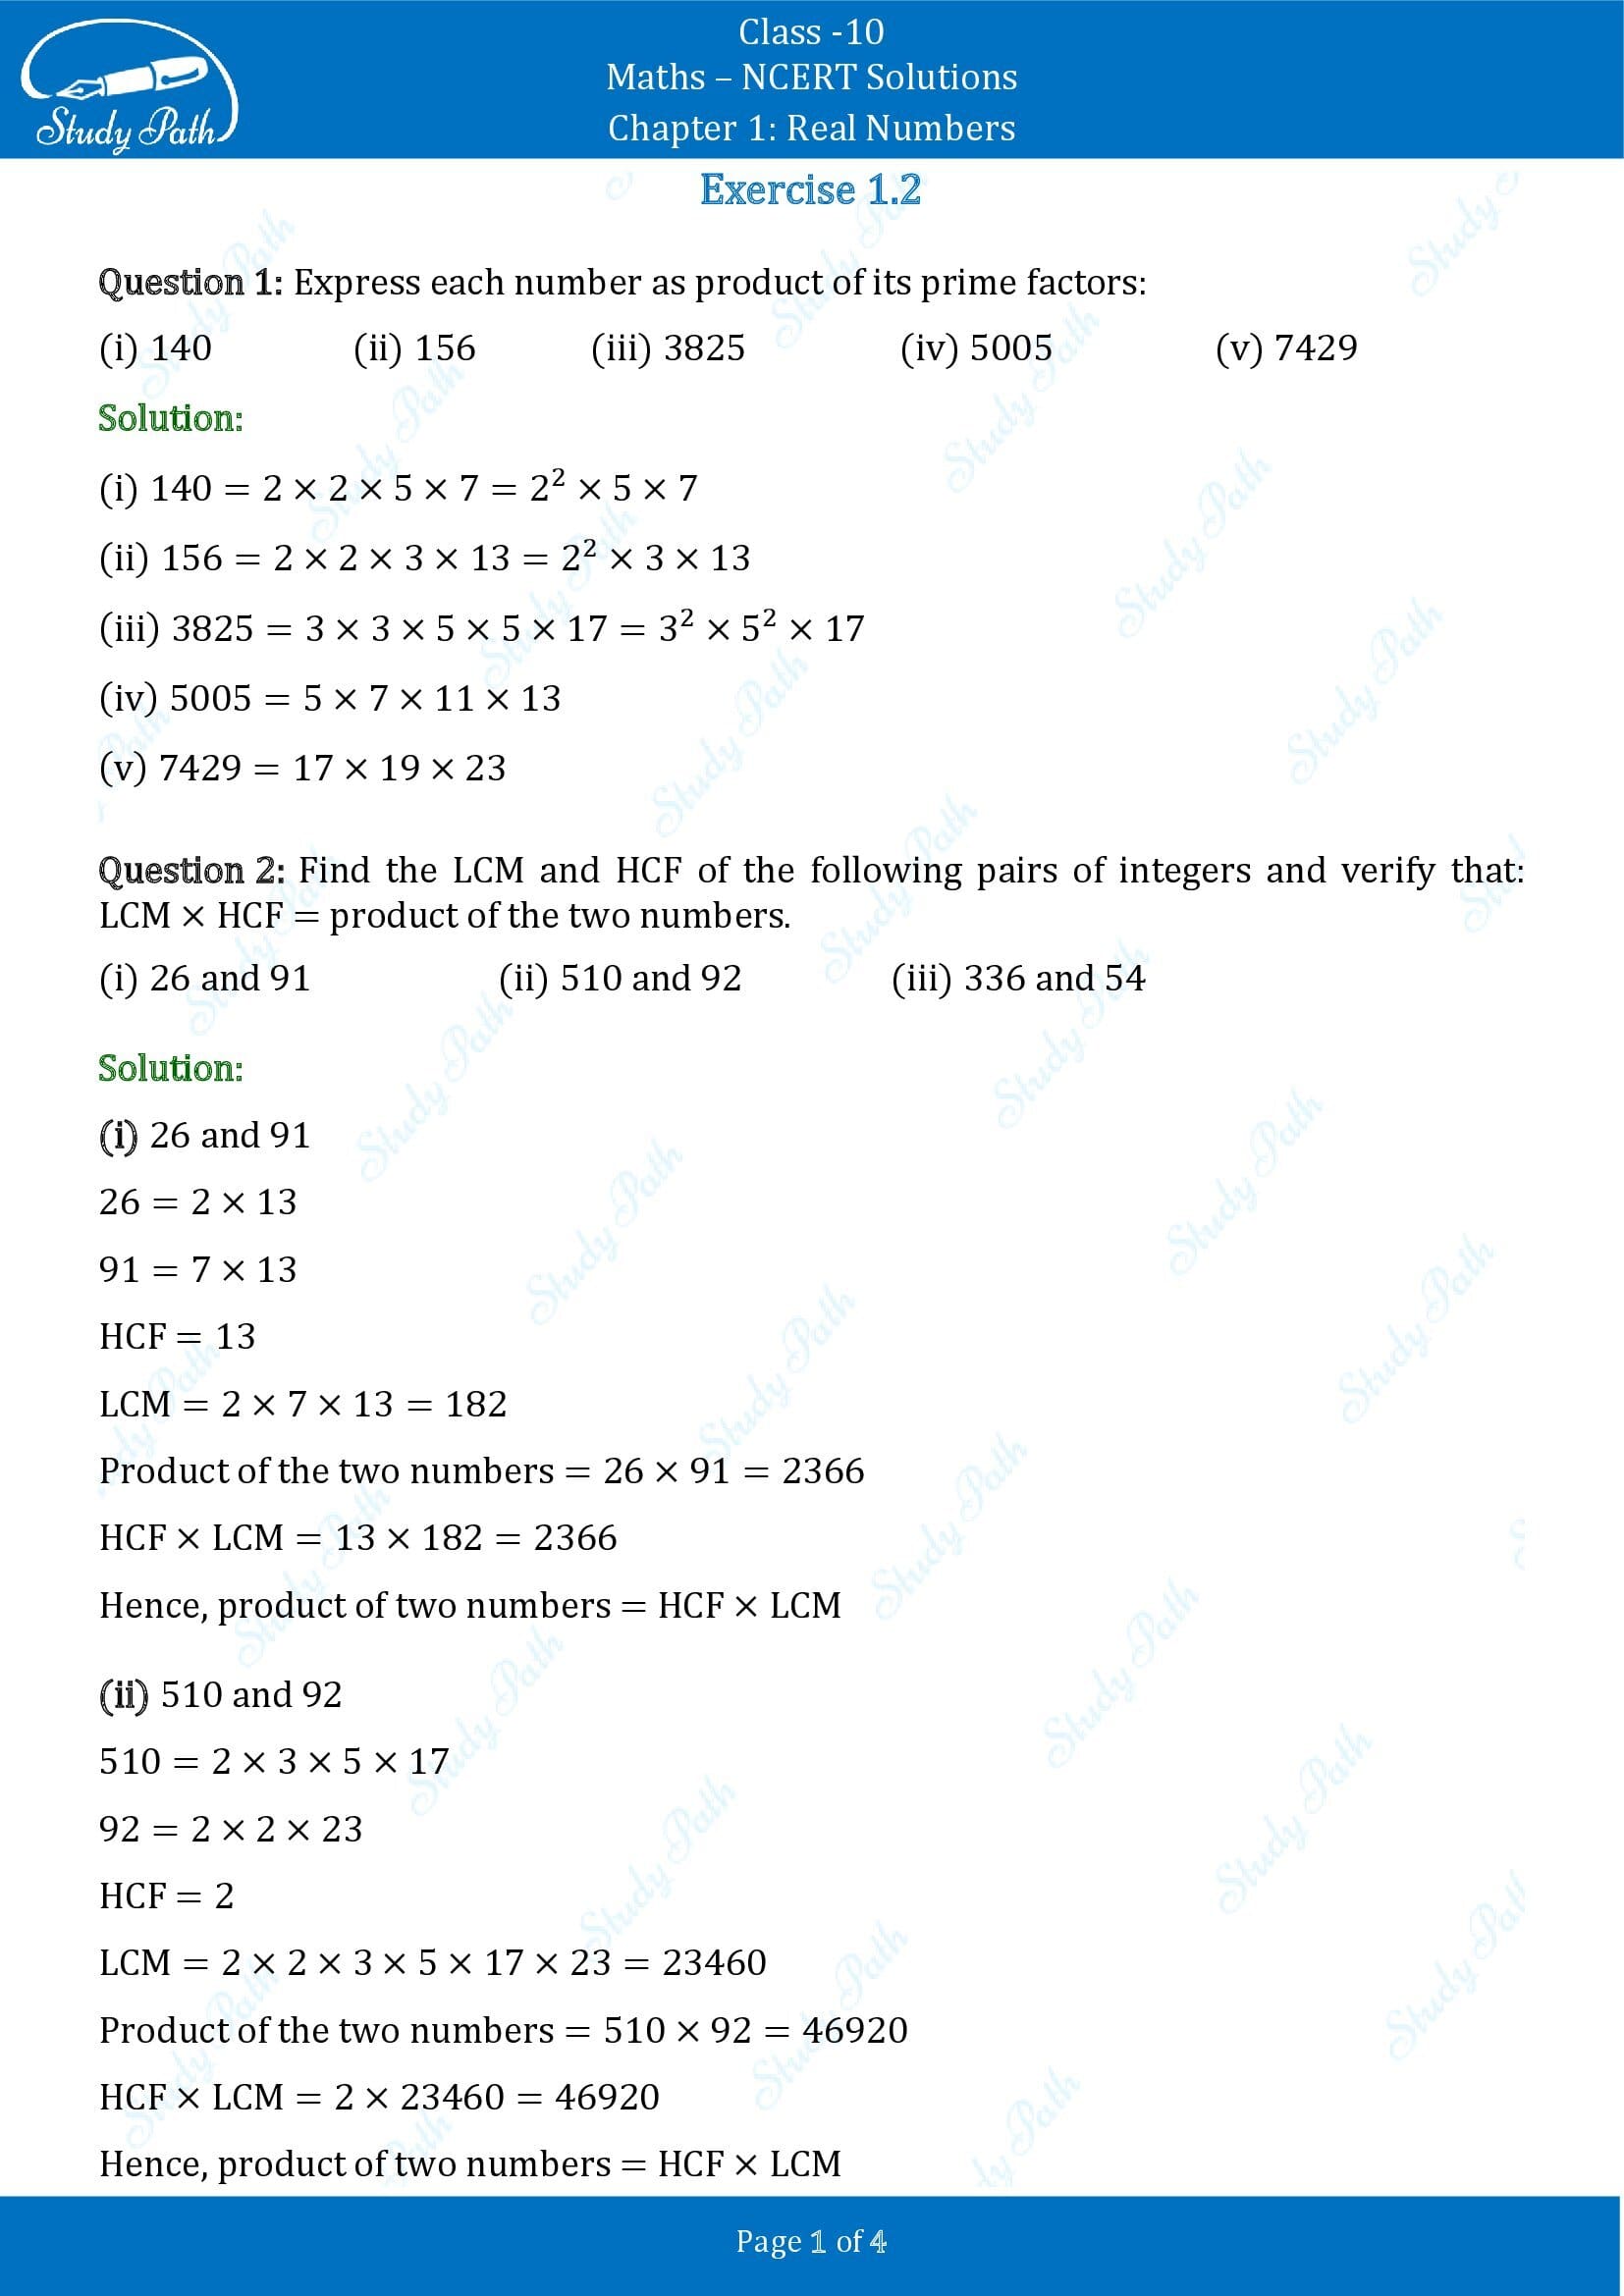 NCERT Solutions for Class 10 Maths Chapter 1 Real Numbers Exercise 1.2 00001